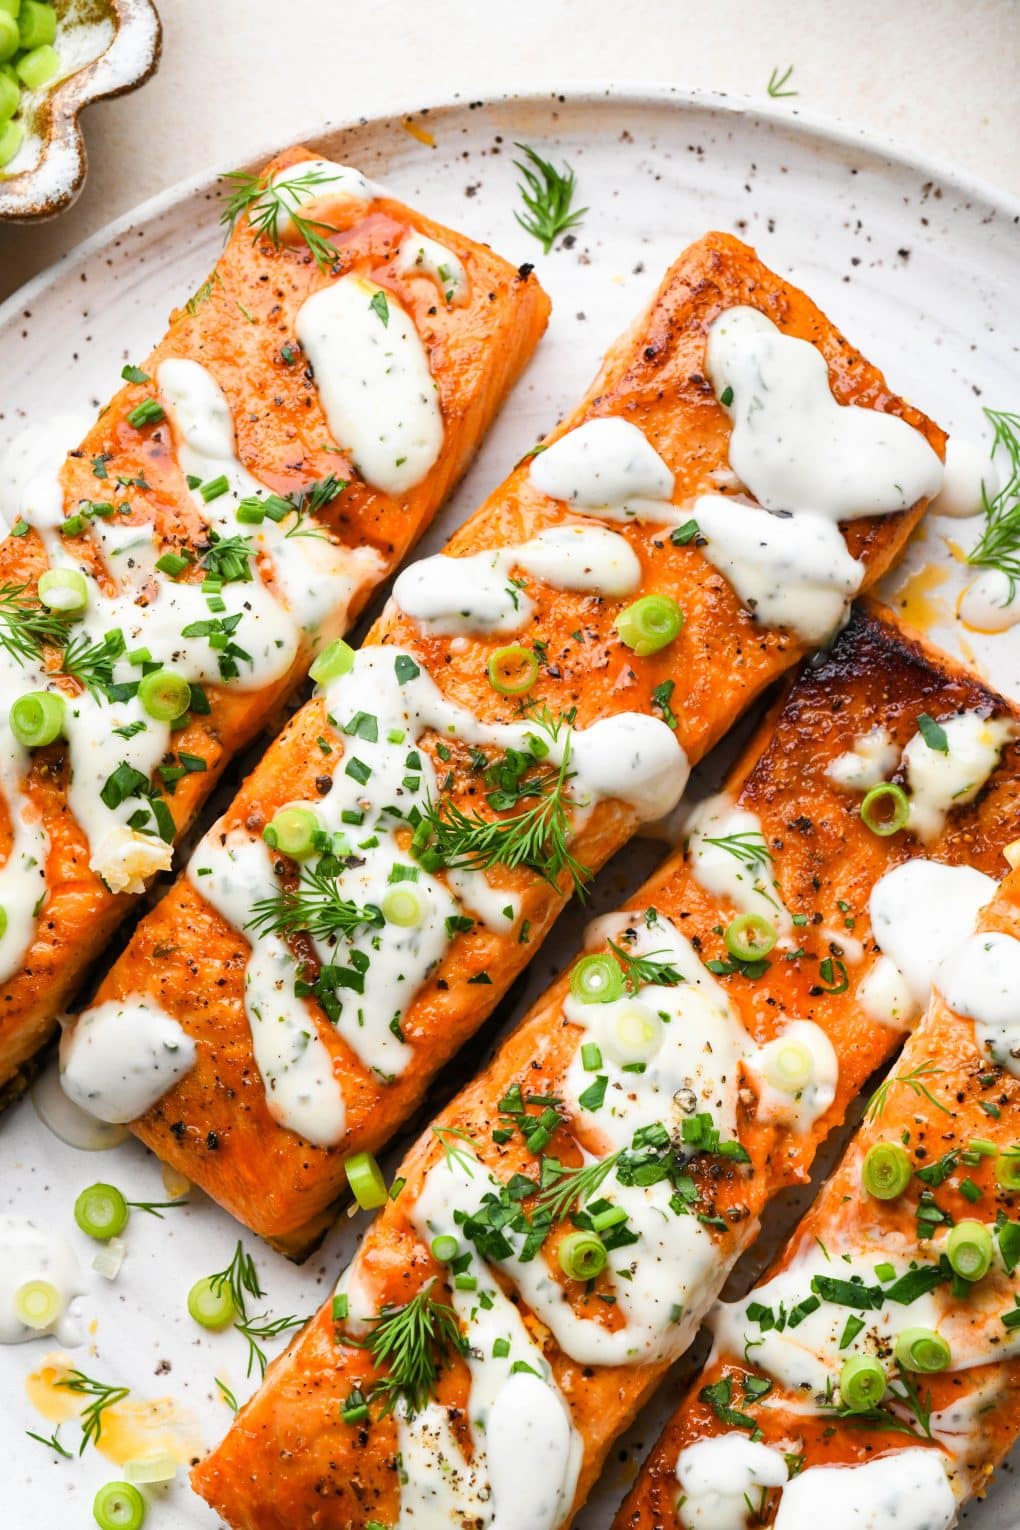 Four buffalo salmon filets on a white speckled plate baked to perfection and topped with a drizzle of dairy free ranch dressing, fresh herbs, and green onions.